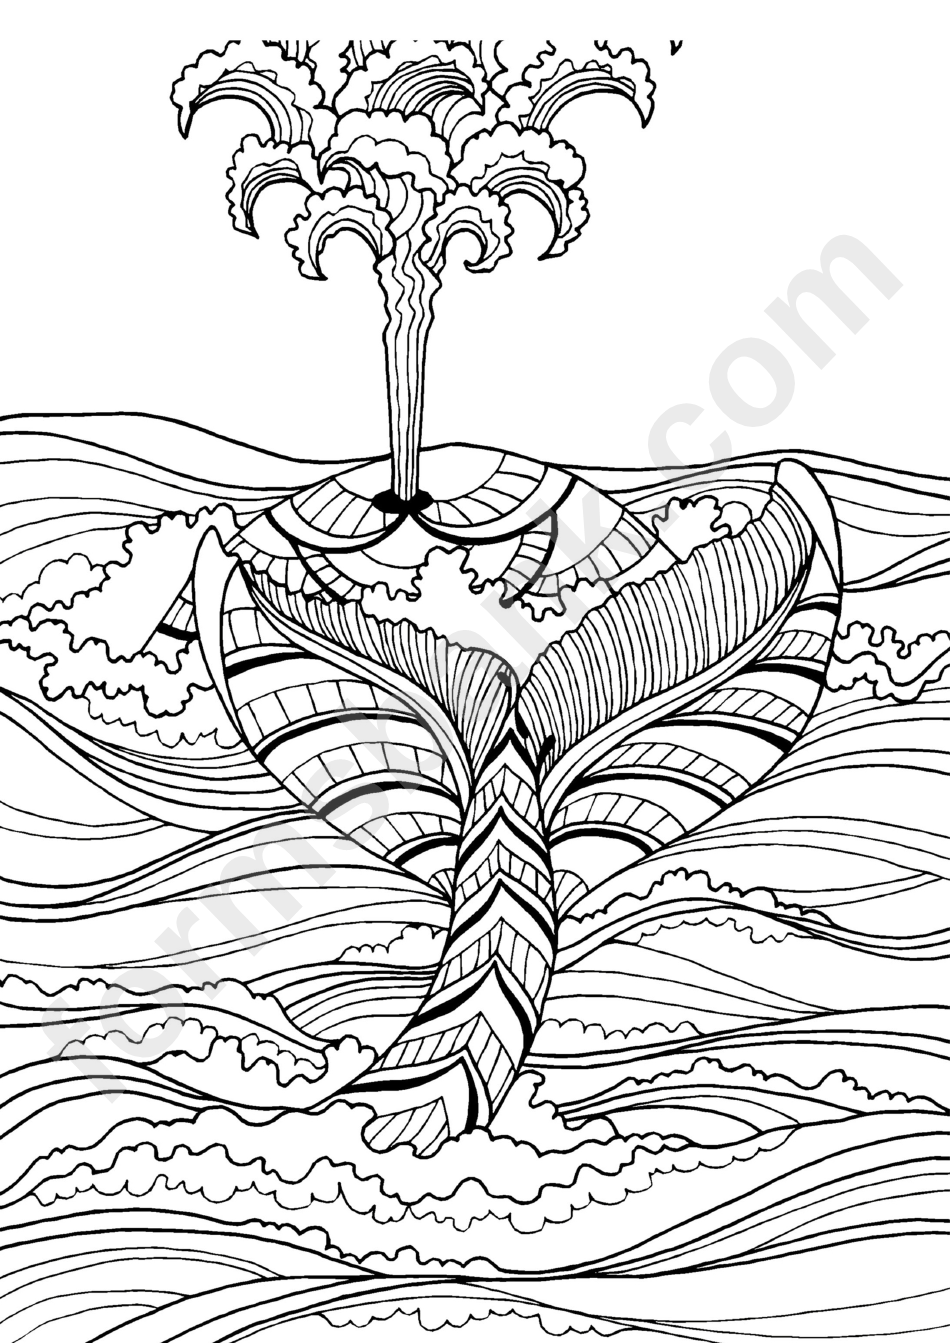 Whale Coloring Sheet